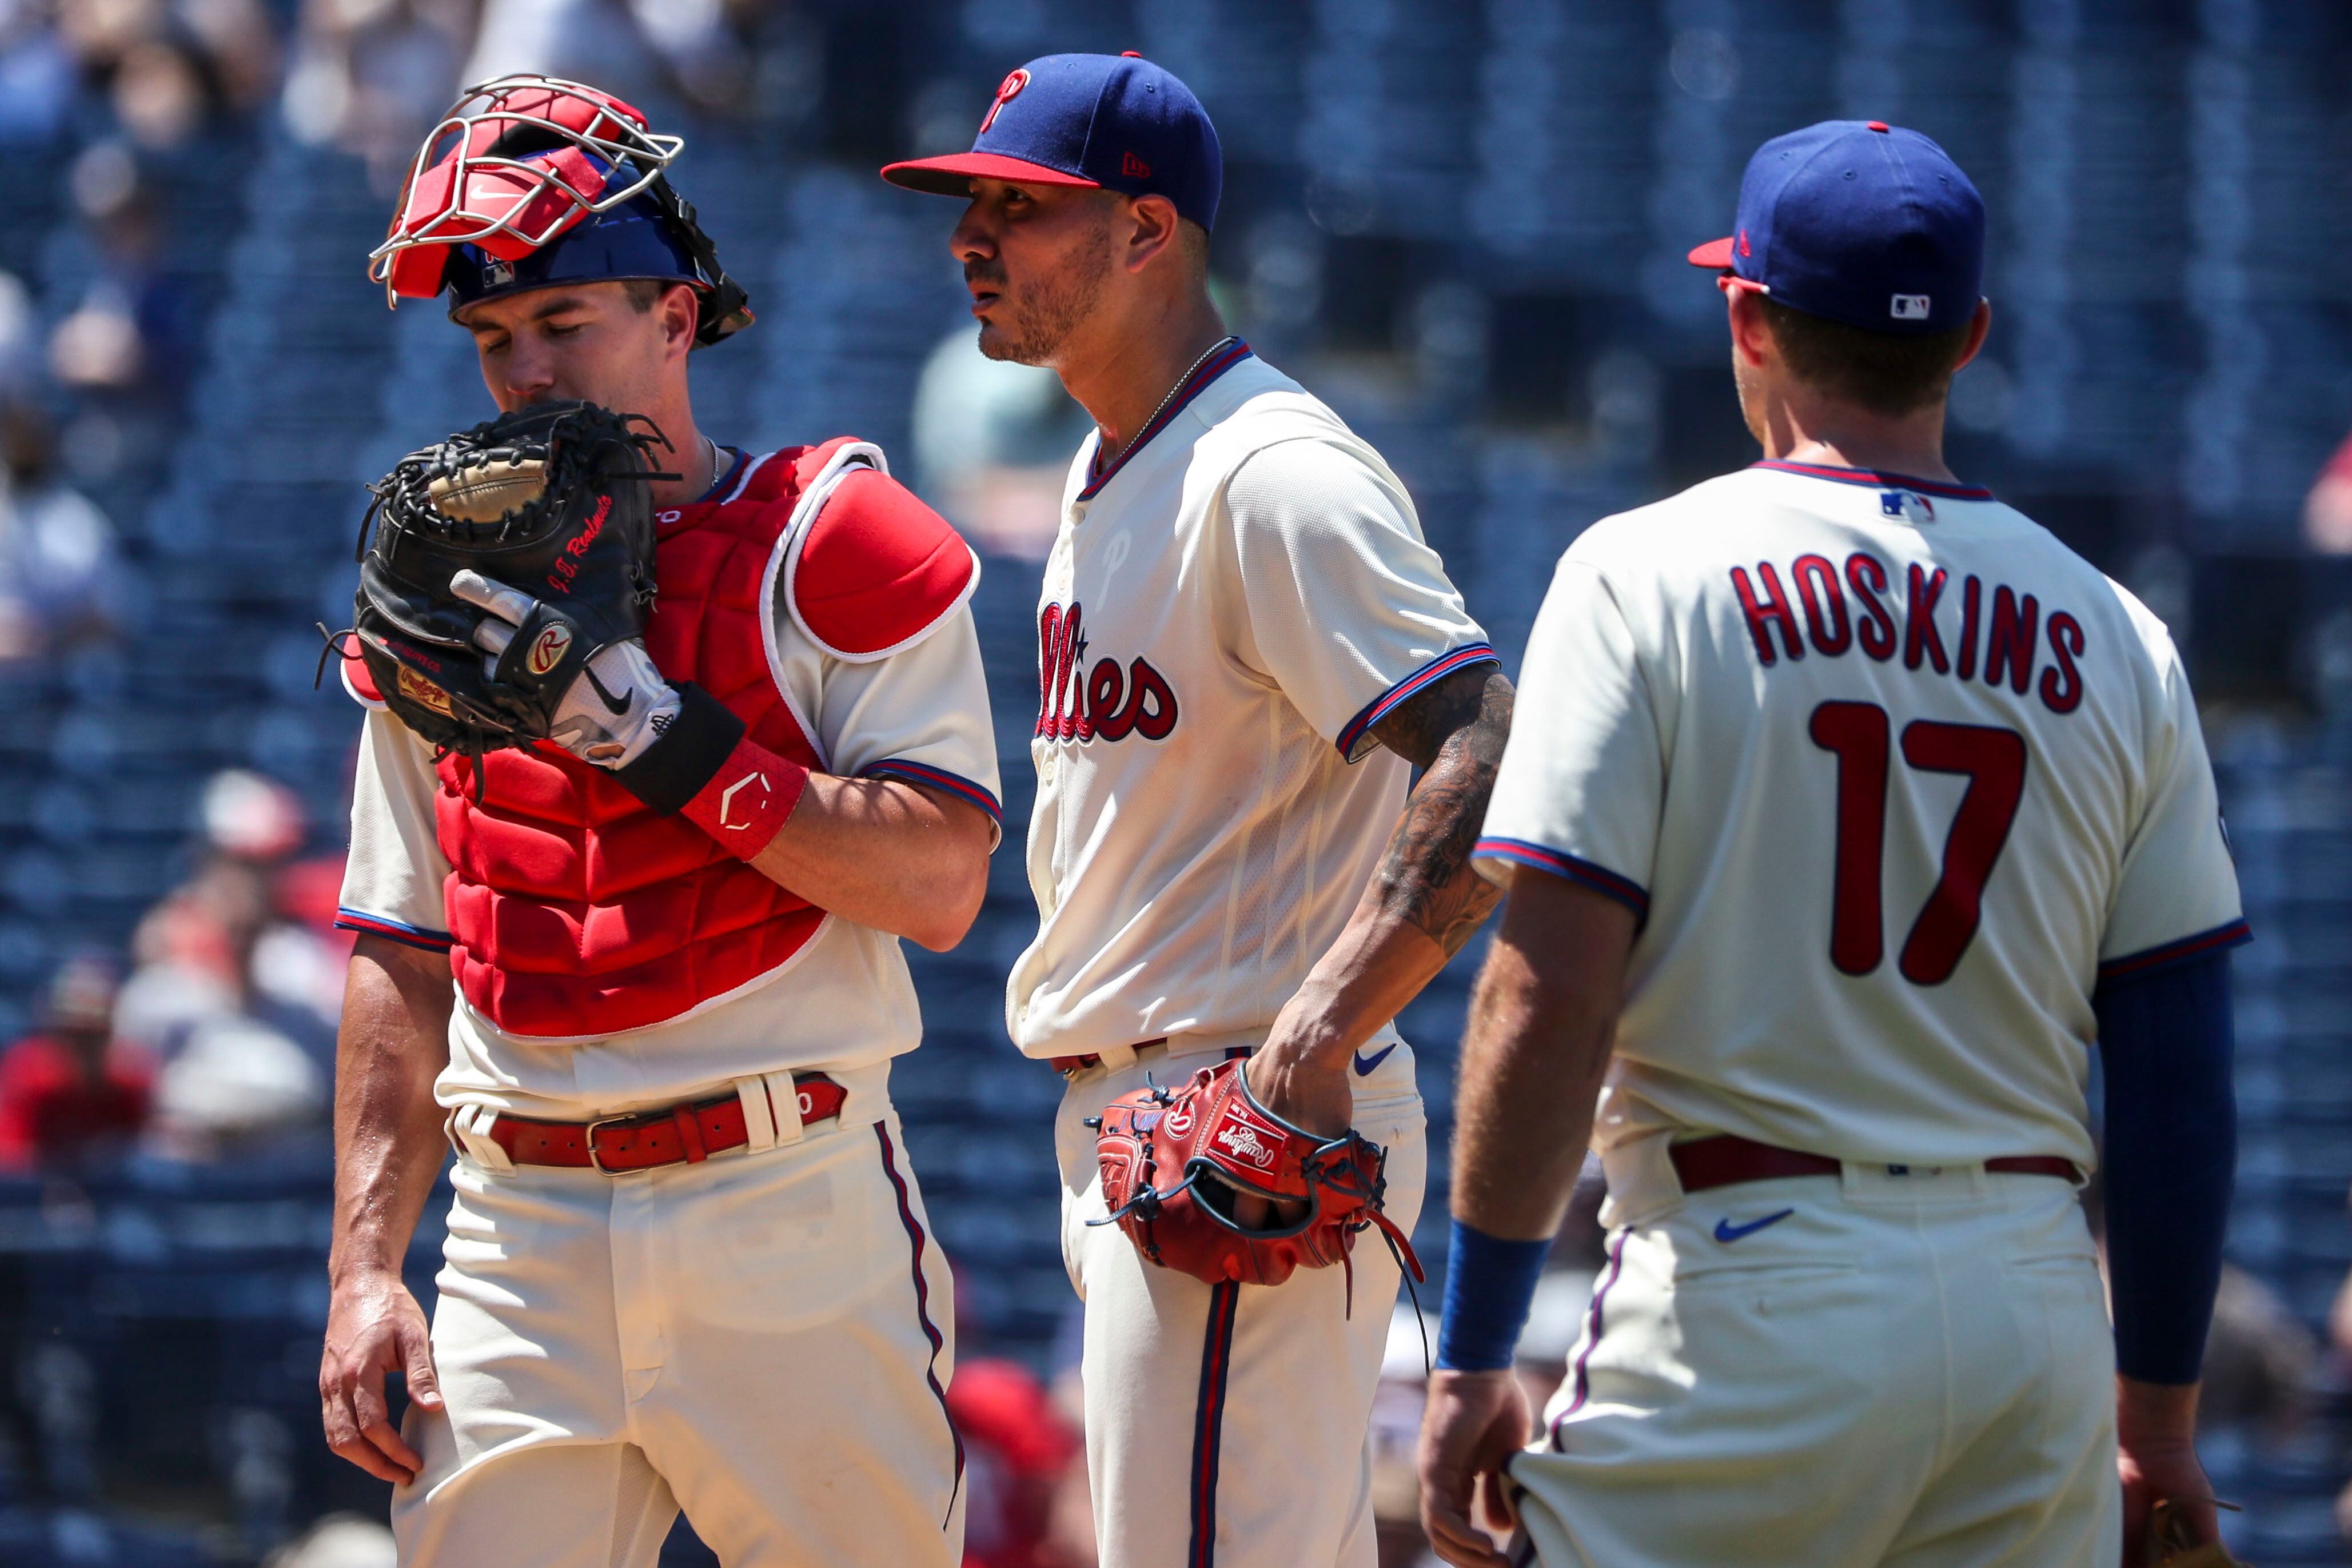 Nick Maton's clutch homer leads Phillies past Alcántara's Marlins   Phillies Nation - Your source for Philadelphia Phillies news, opinion,  history, rumors, events, and other fun stuff.